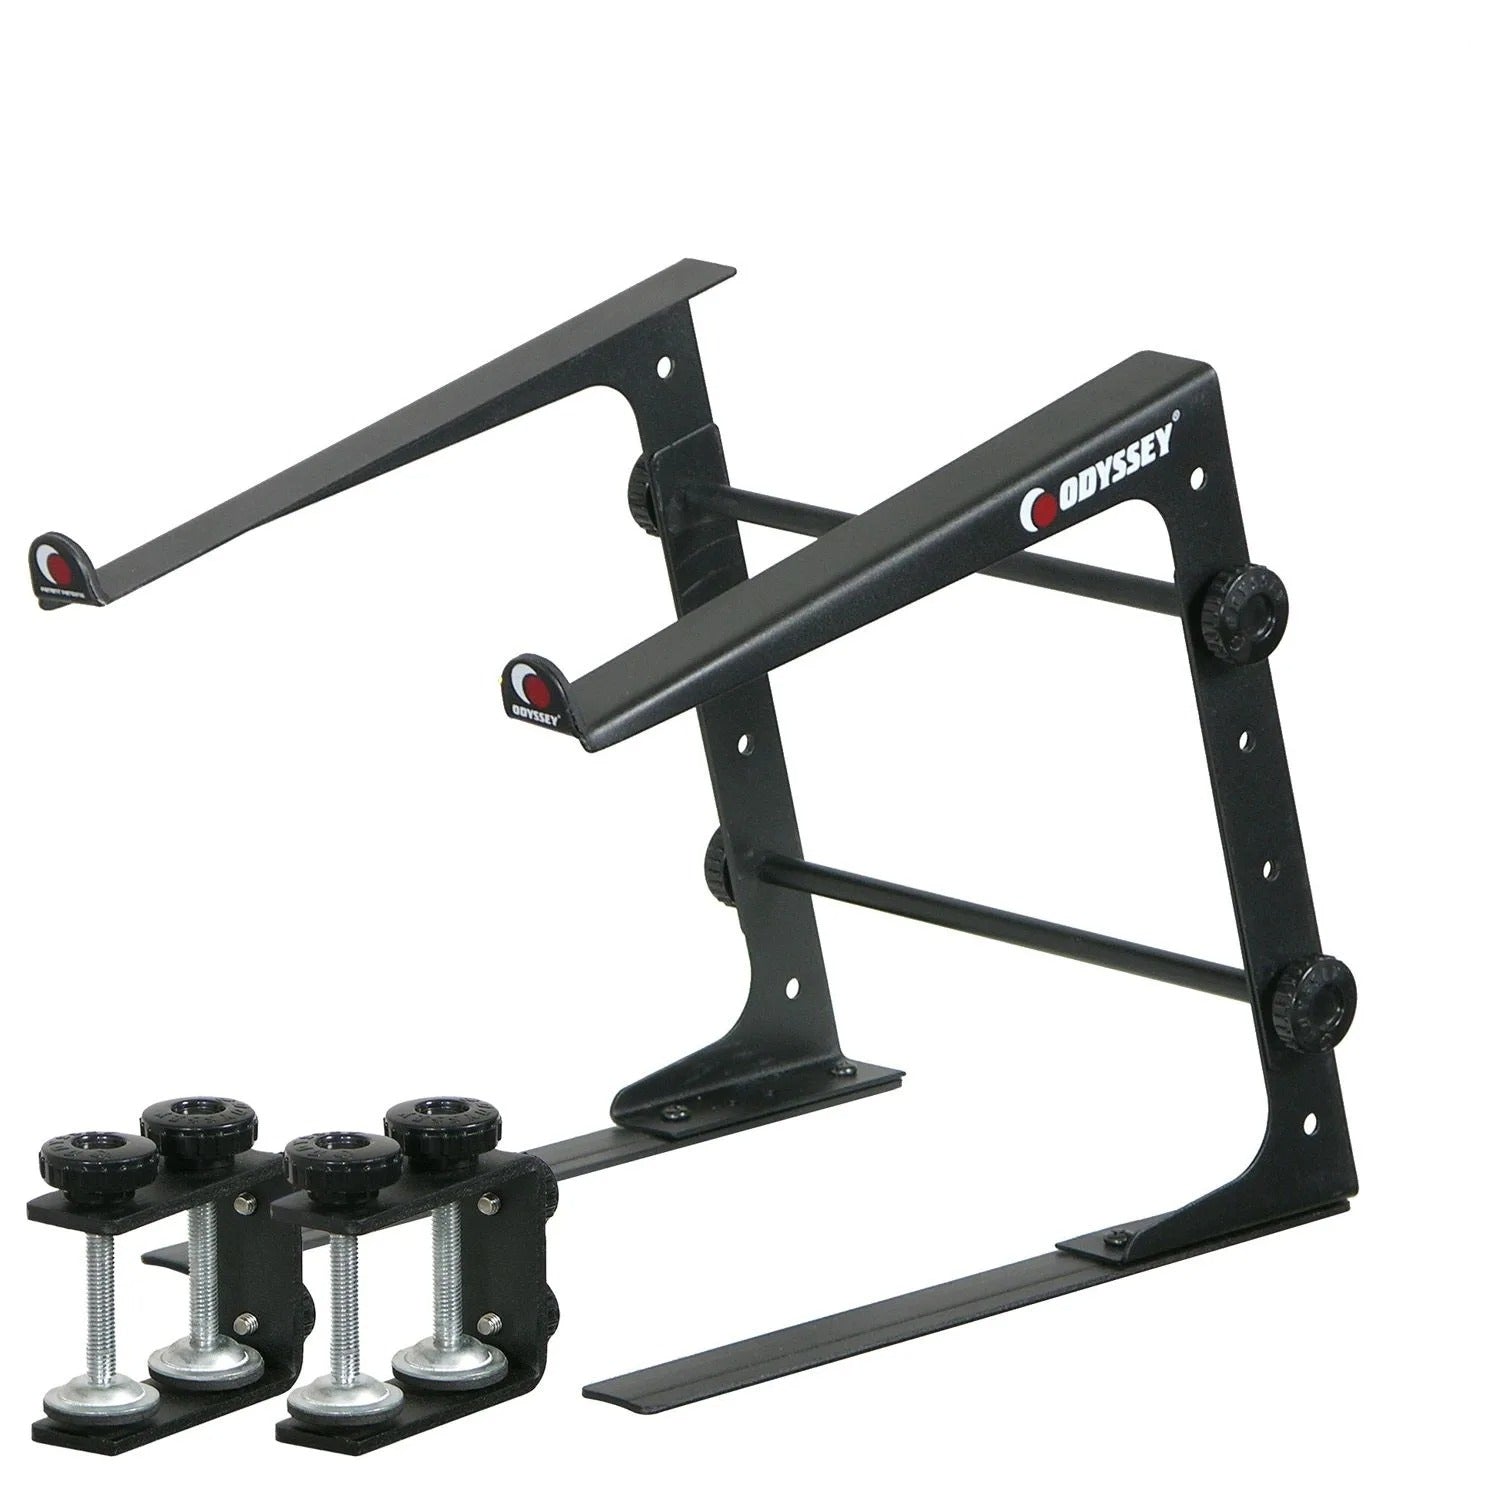 Odyssey LSTAND, DJ Table Top Laptop Stand with Clamps - Black Odyssey